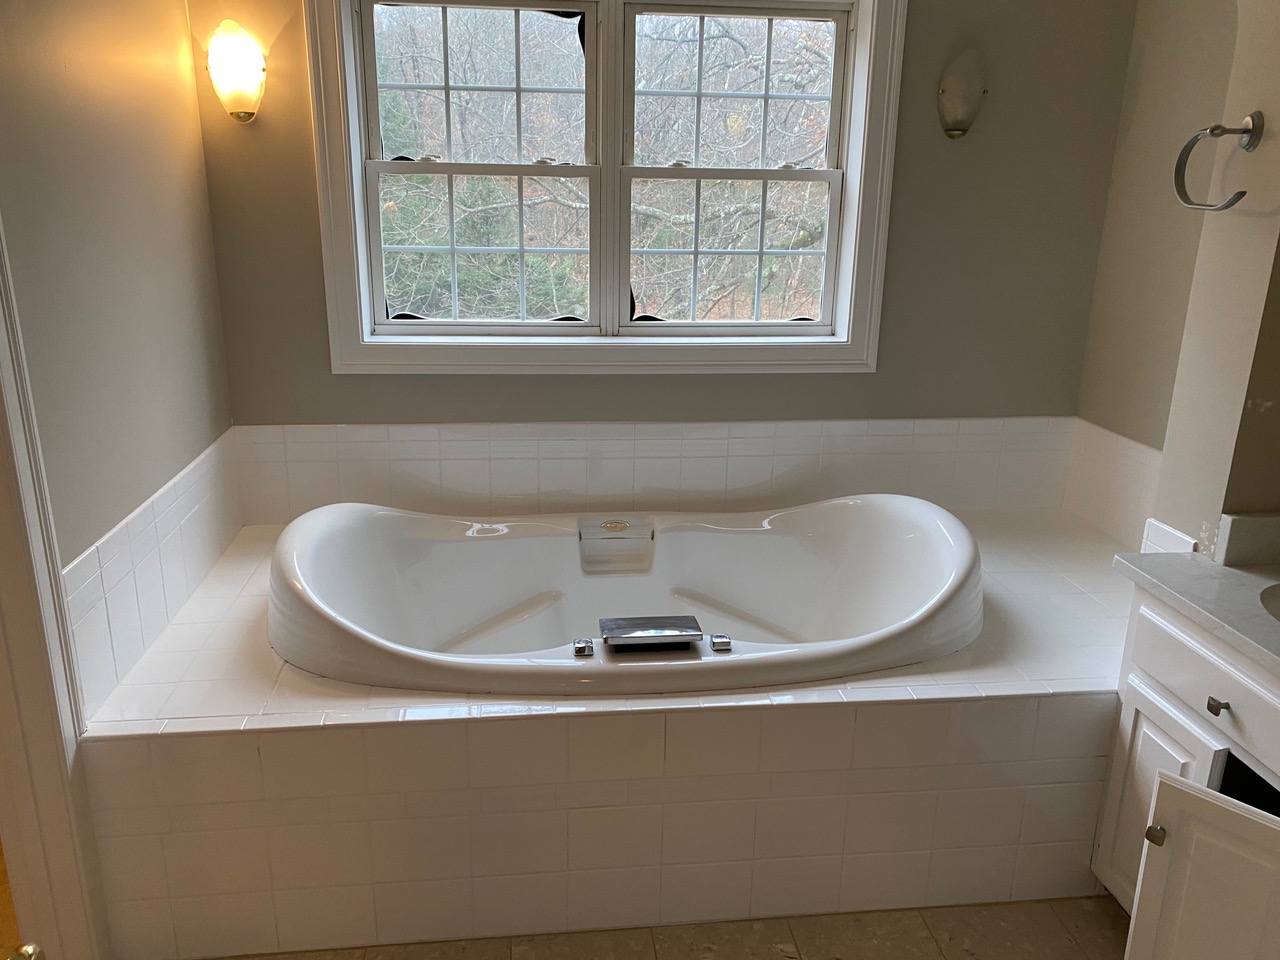 A large white tub in the middle of a bathroom.